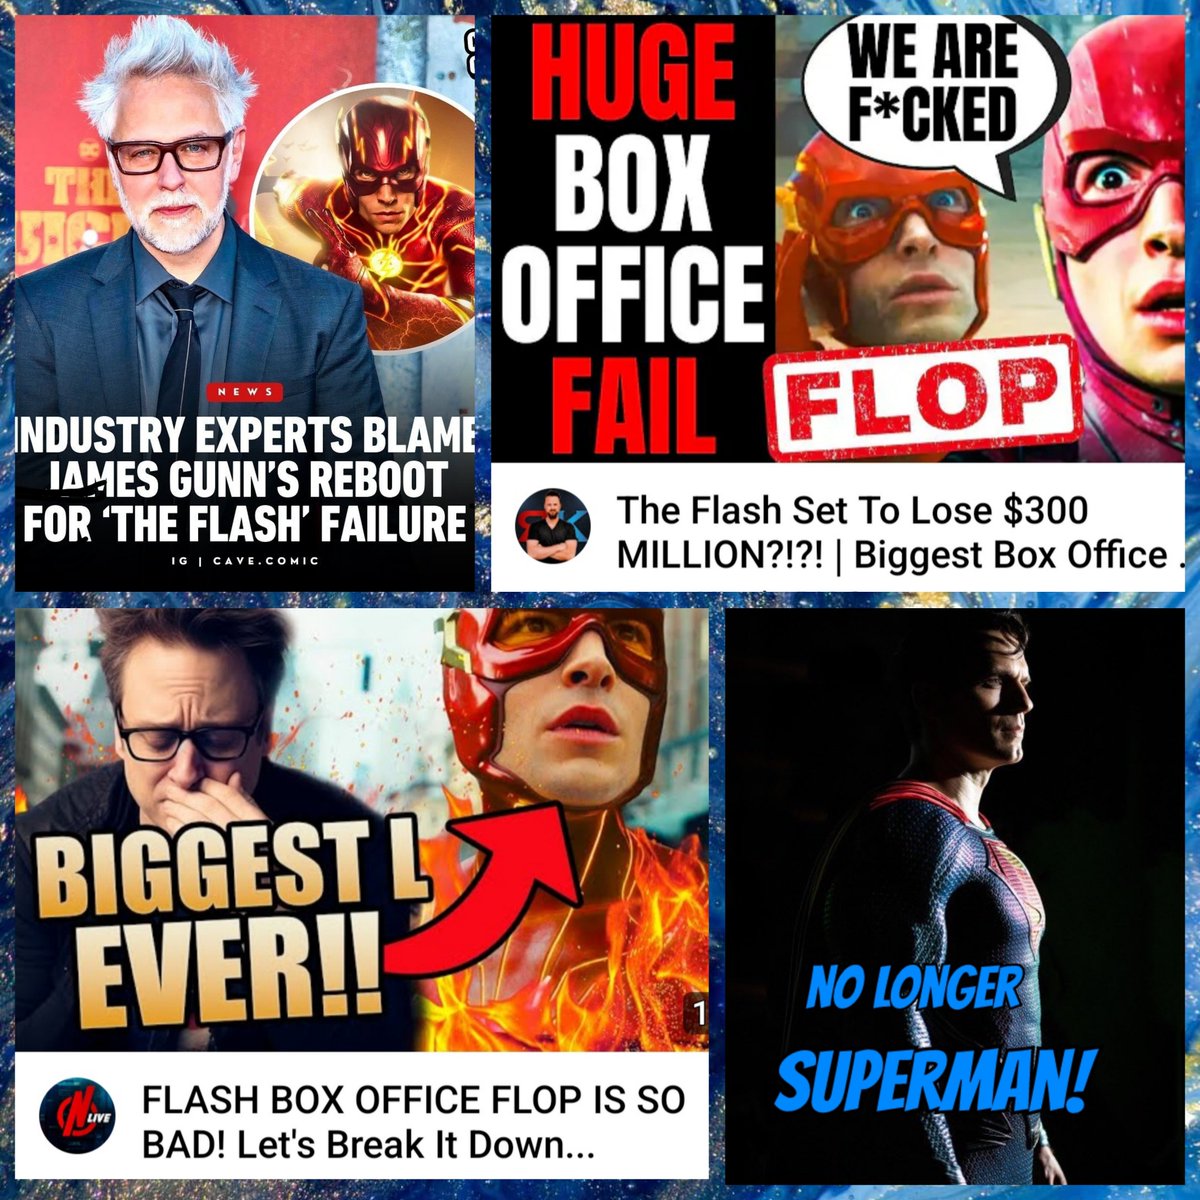 Every bad decision have a price to pay, James Gunn... Now, you're paying for it, and for what you did to the fans!
#FireJamesGunn 
#BoycottWBD
#BoycottTheFlash !